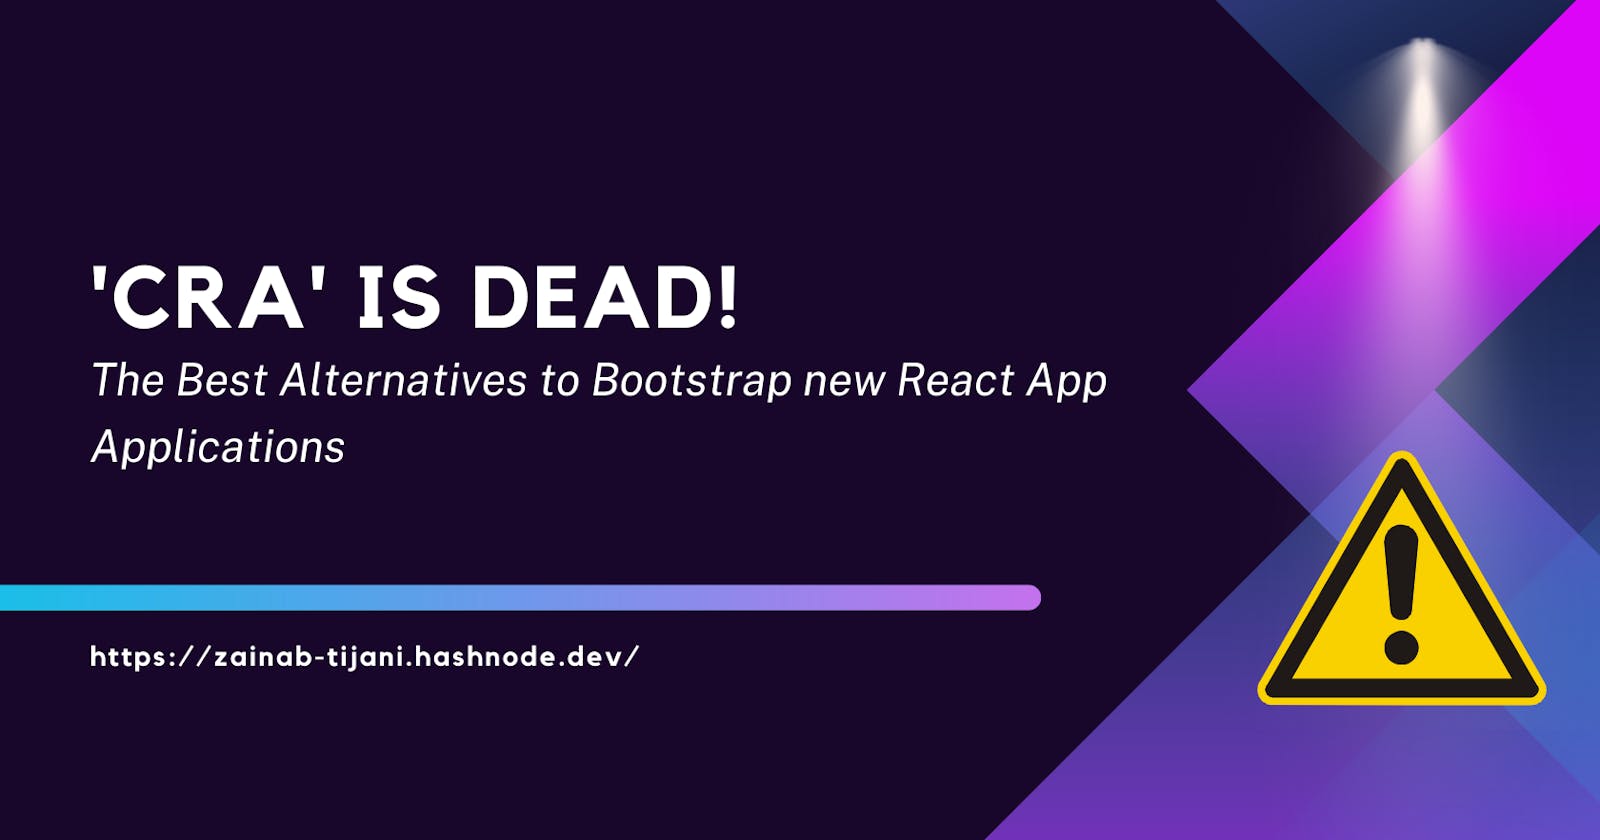 CRA is dead: Best Alternatives to Bootstrap React Applications